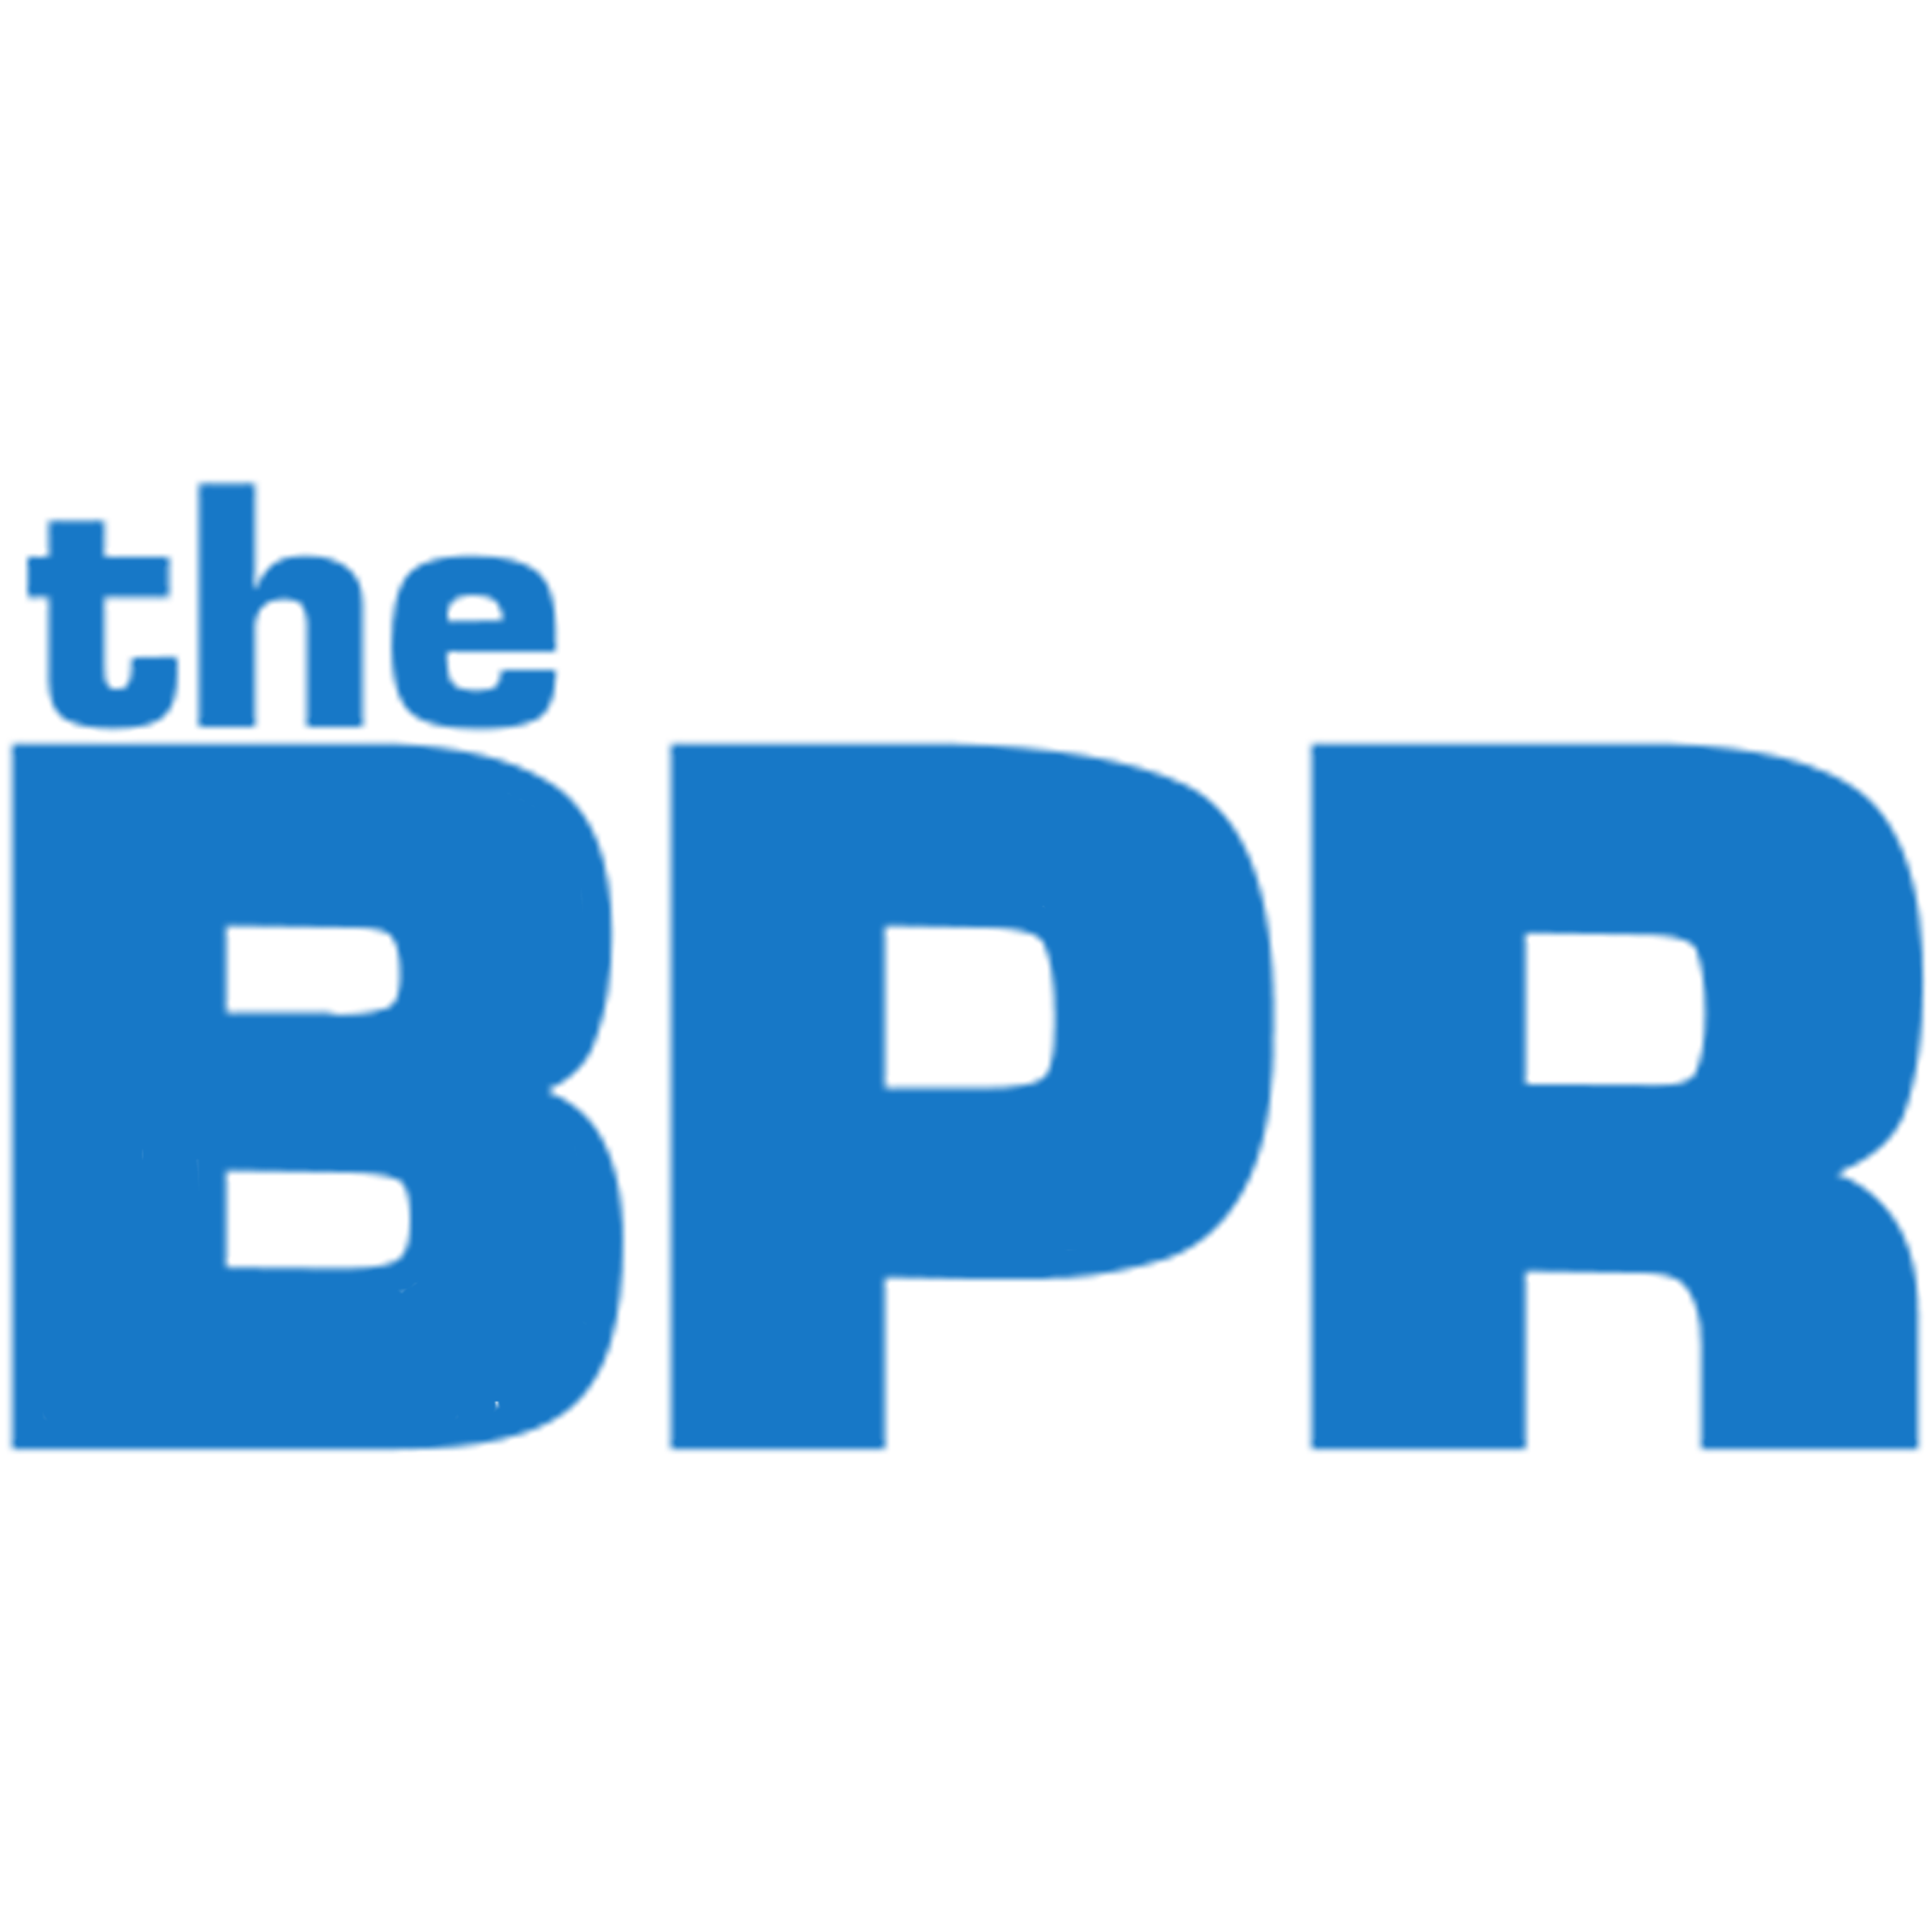 The BPR - The Business Process Repository - Optimum Output